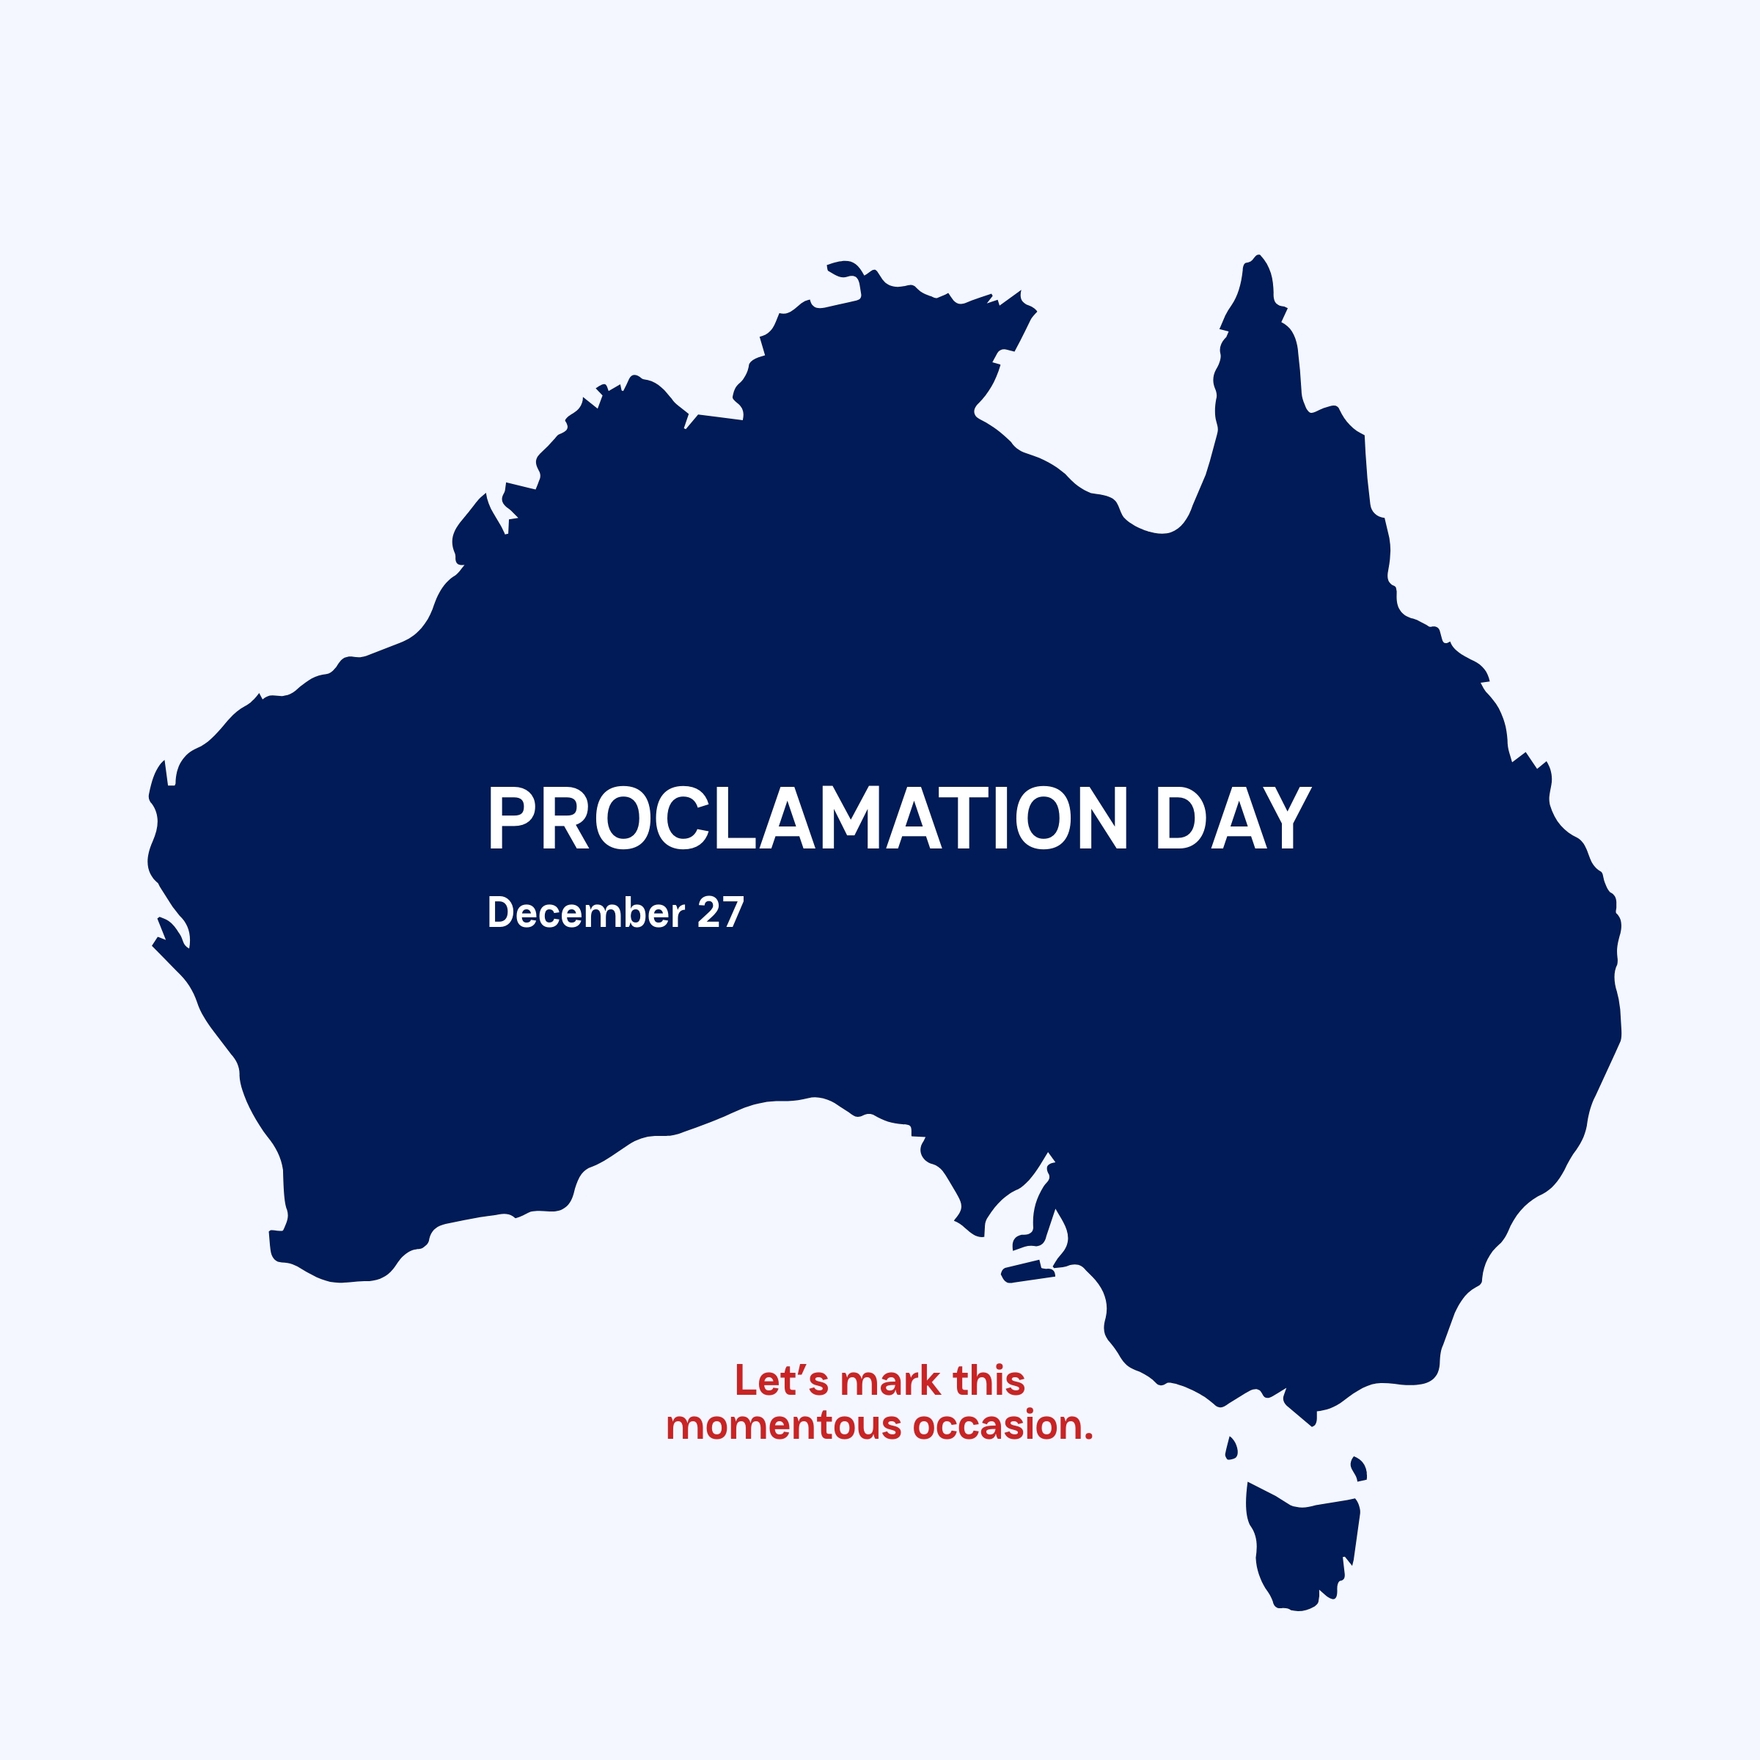 Free Proclamation Day WhatsApp Post in Illustrator, PSD, EPS, SVG, PNG, JPEG